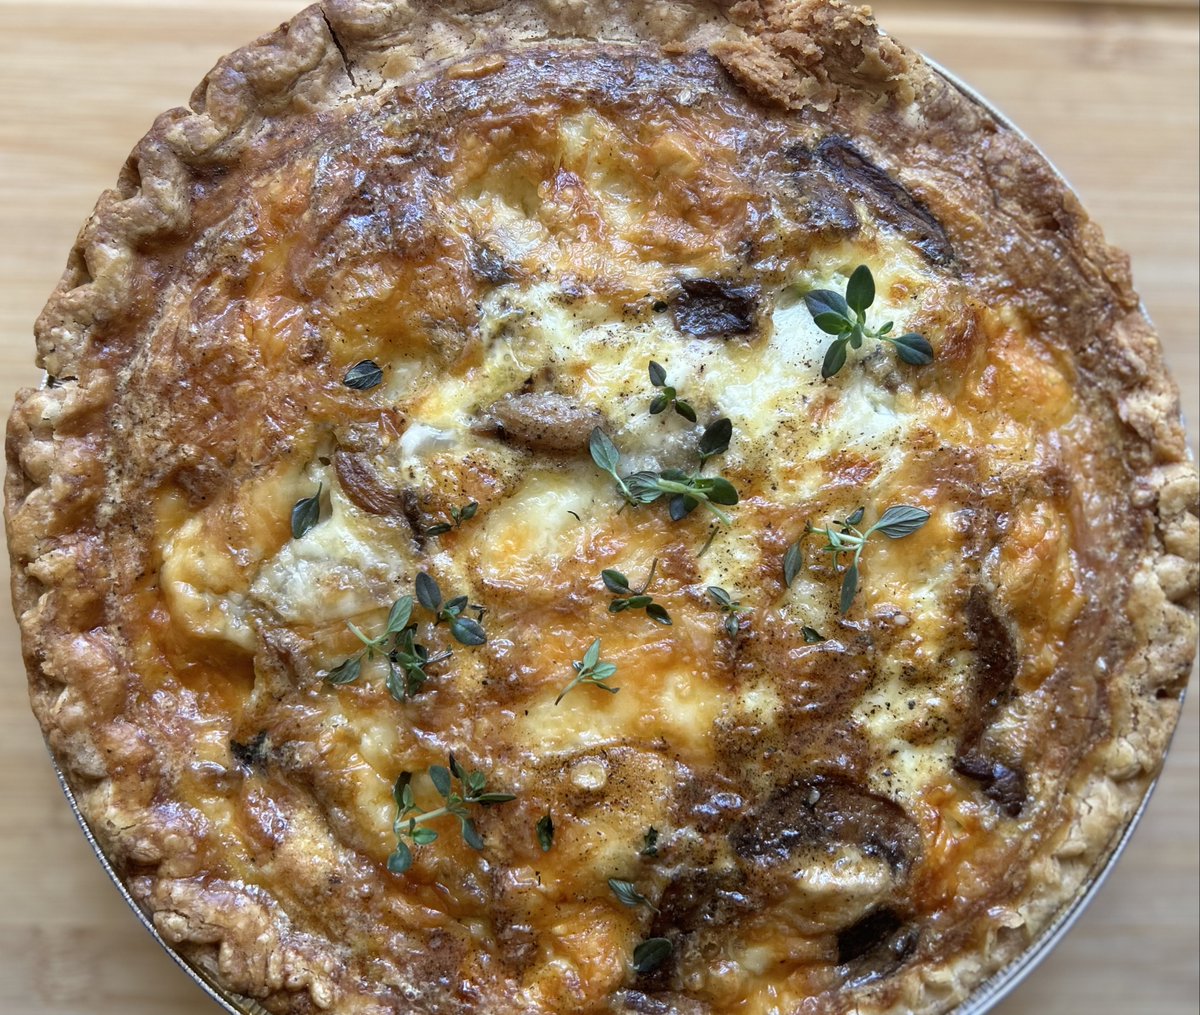 just made a cheesy mushroom quiche thankful for frozen crusts